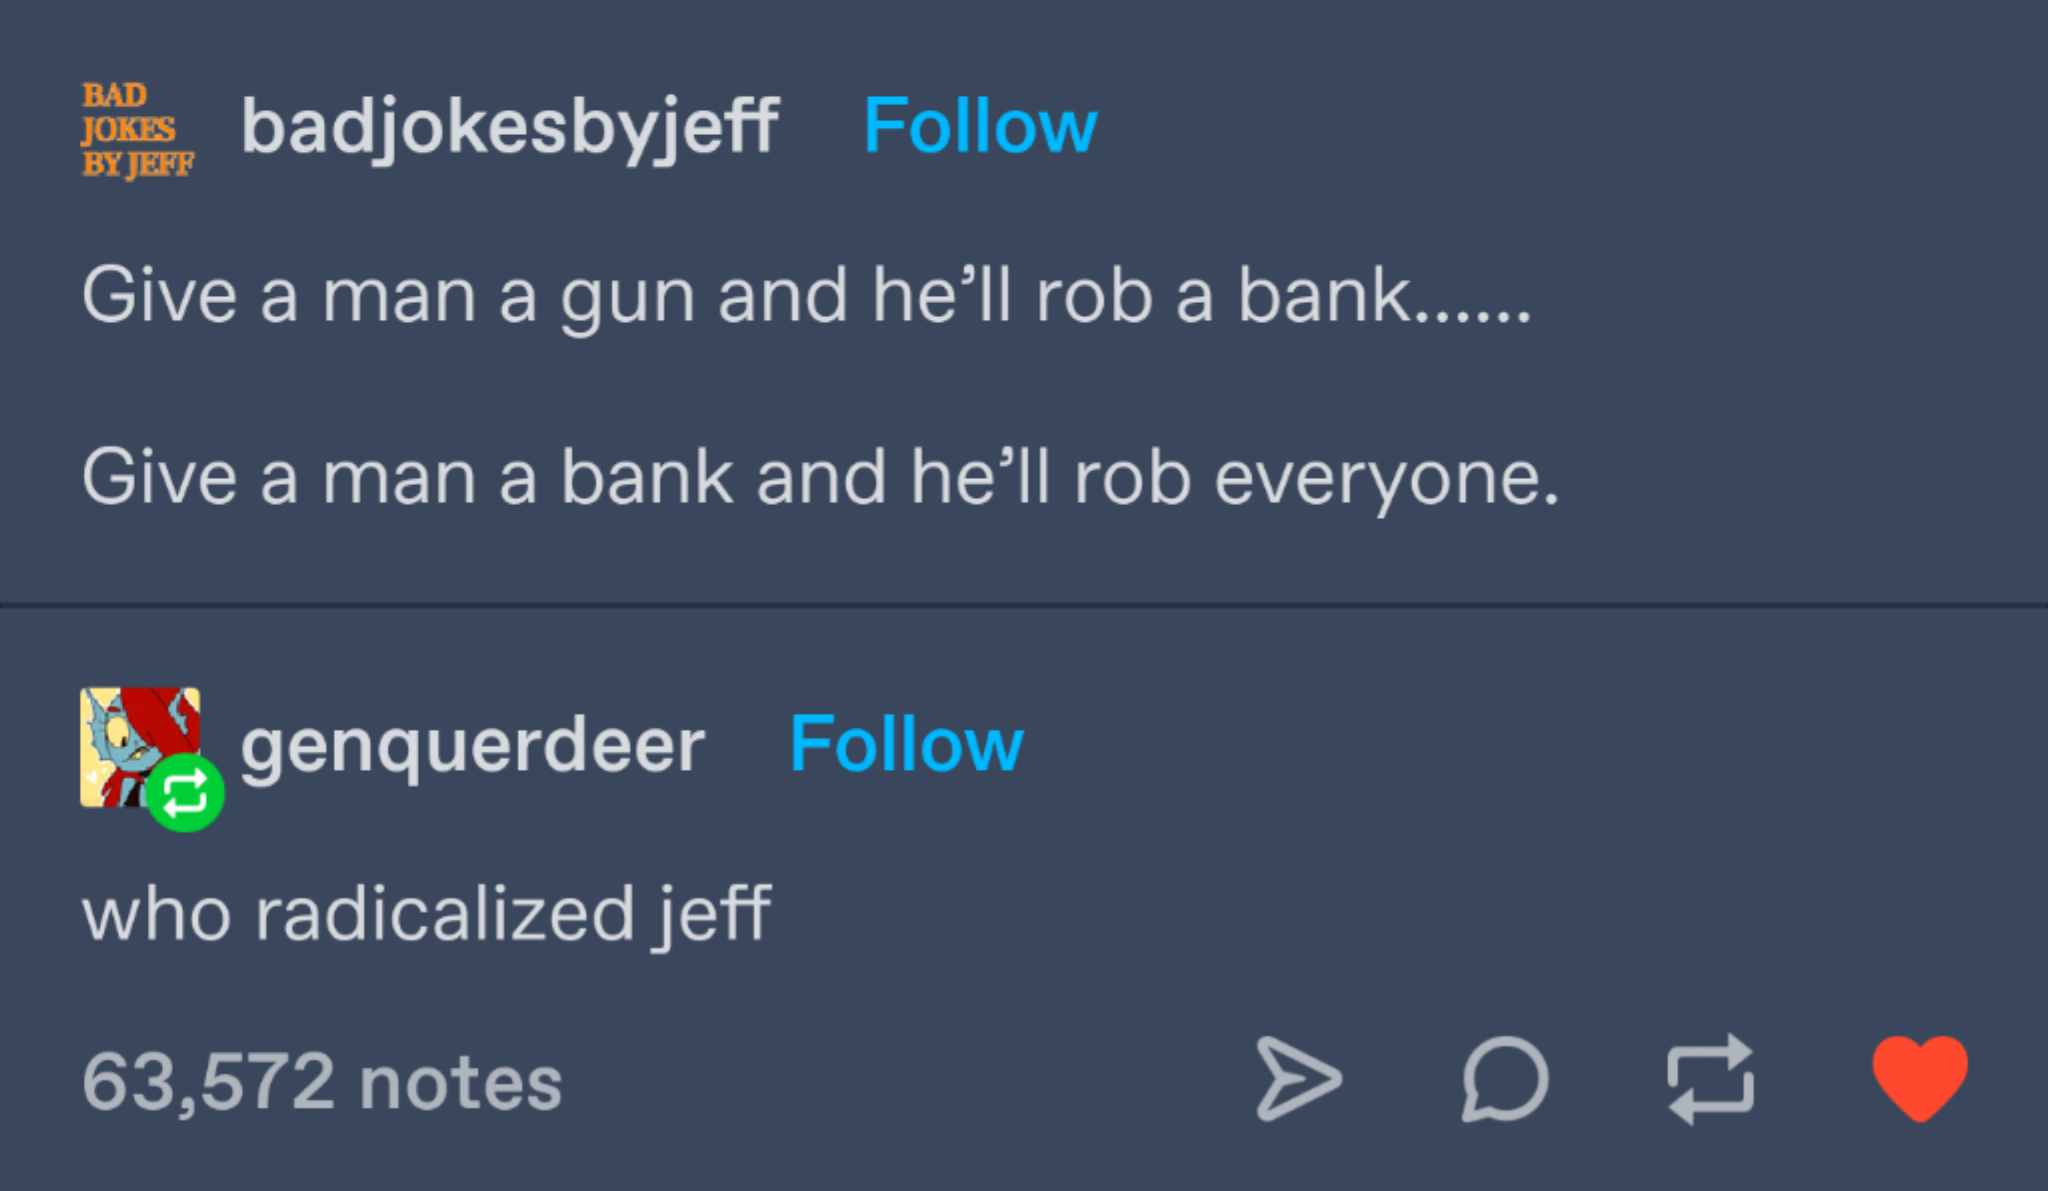 cool pics and funny memes - Funny meme - Bad Jokes badjokesbyjeff By Jeff Give a man a gun and he'll rob a bank...... Give a man a bank and he'll rob everyone. genquerdeer who radicalized jeff 63,572 notes A Df